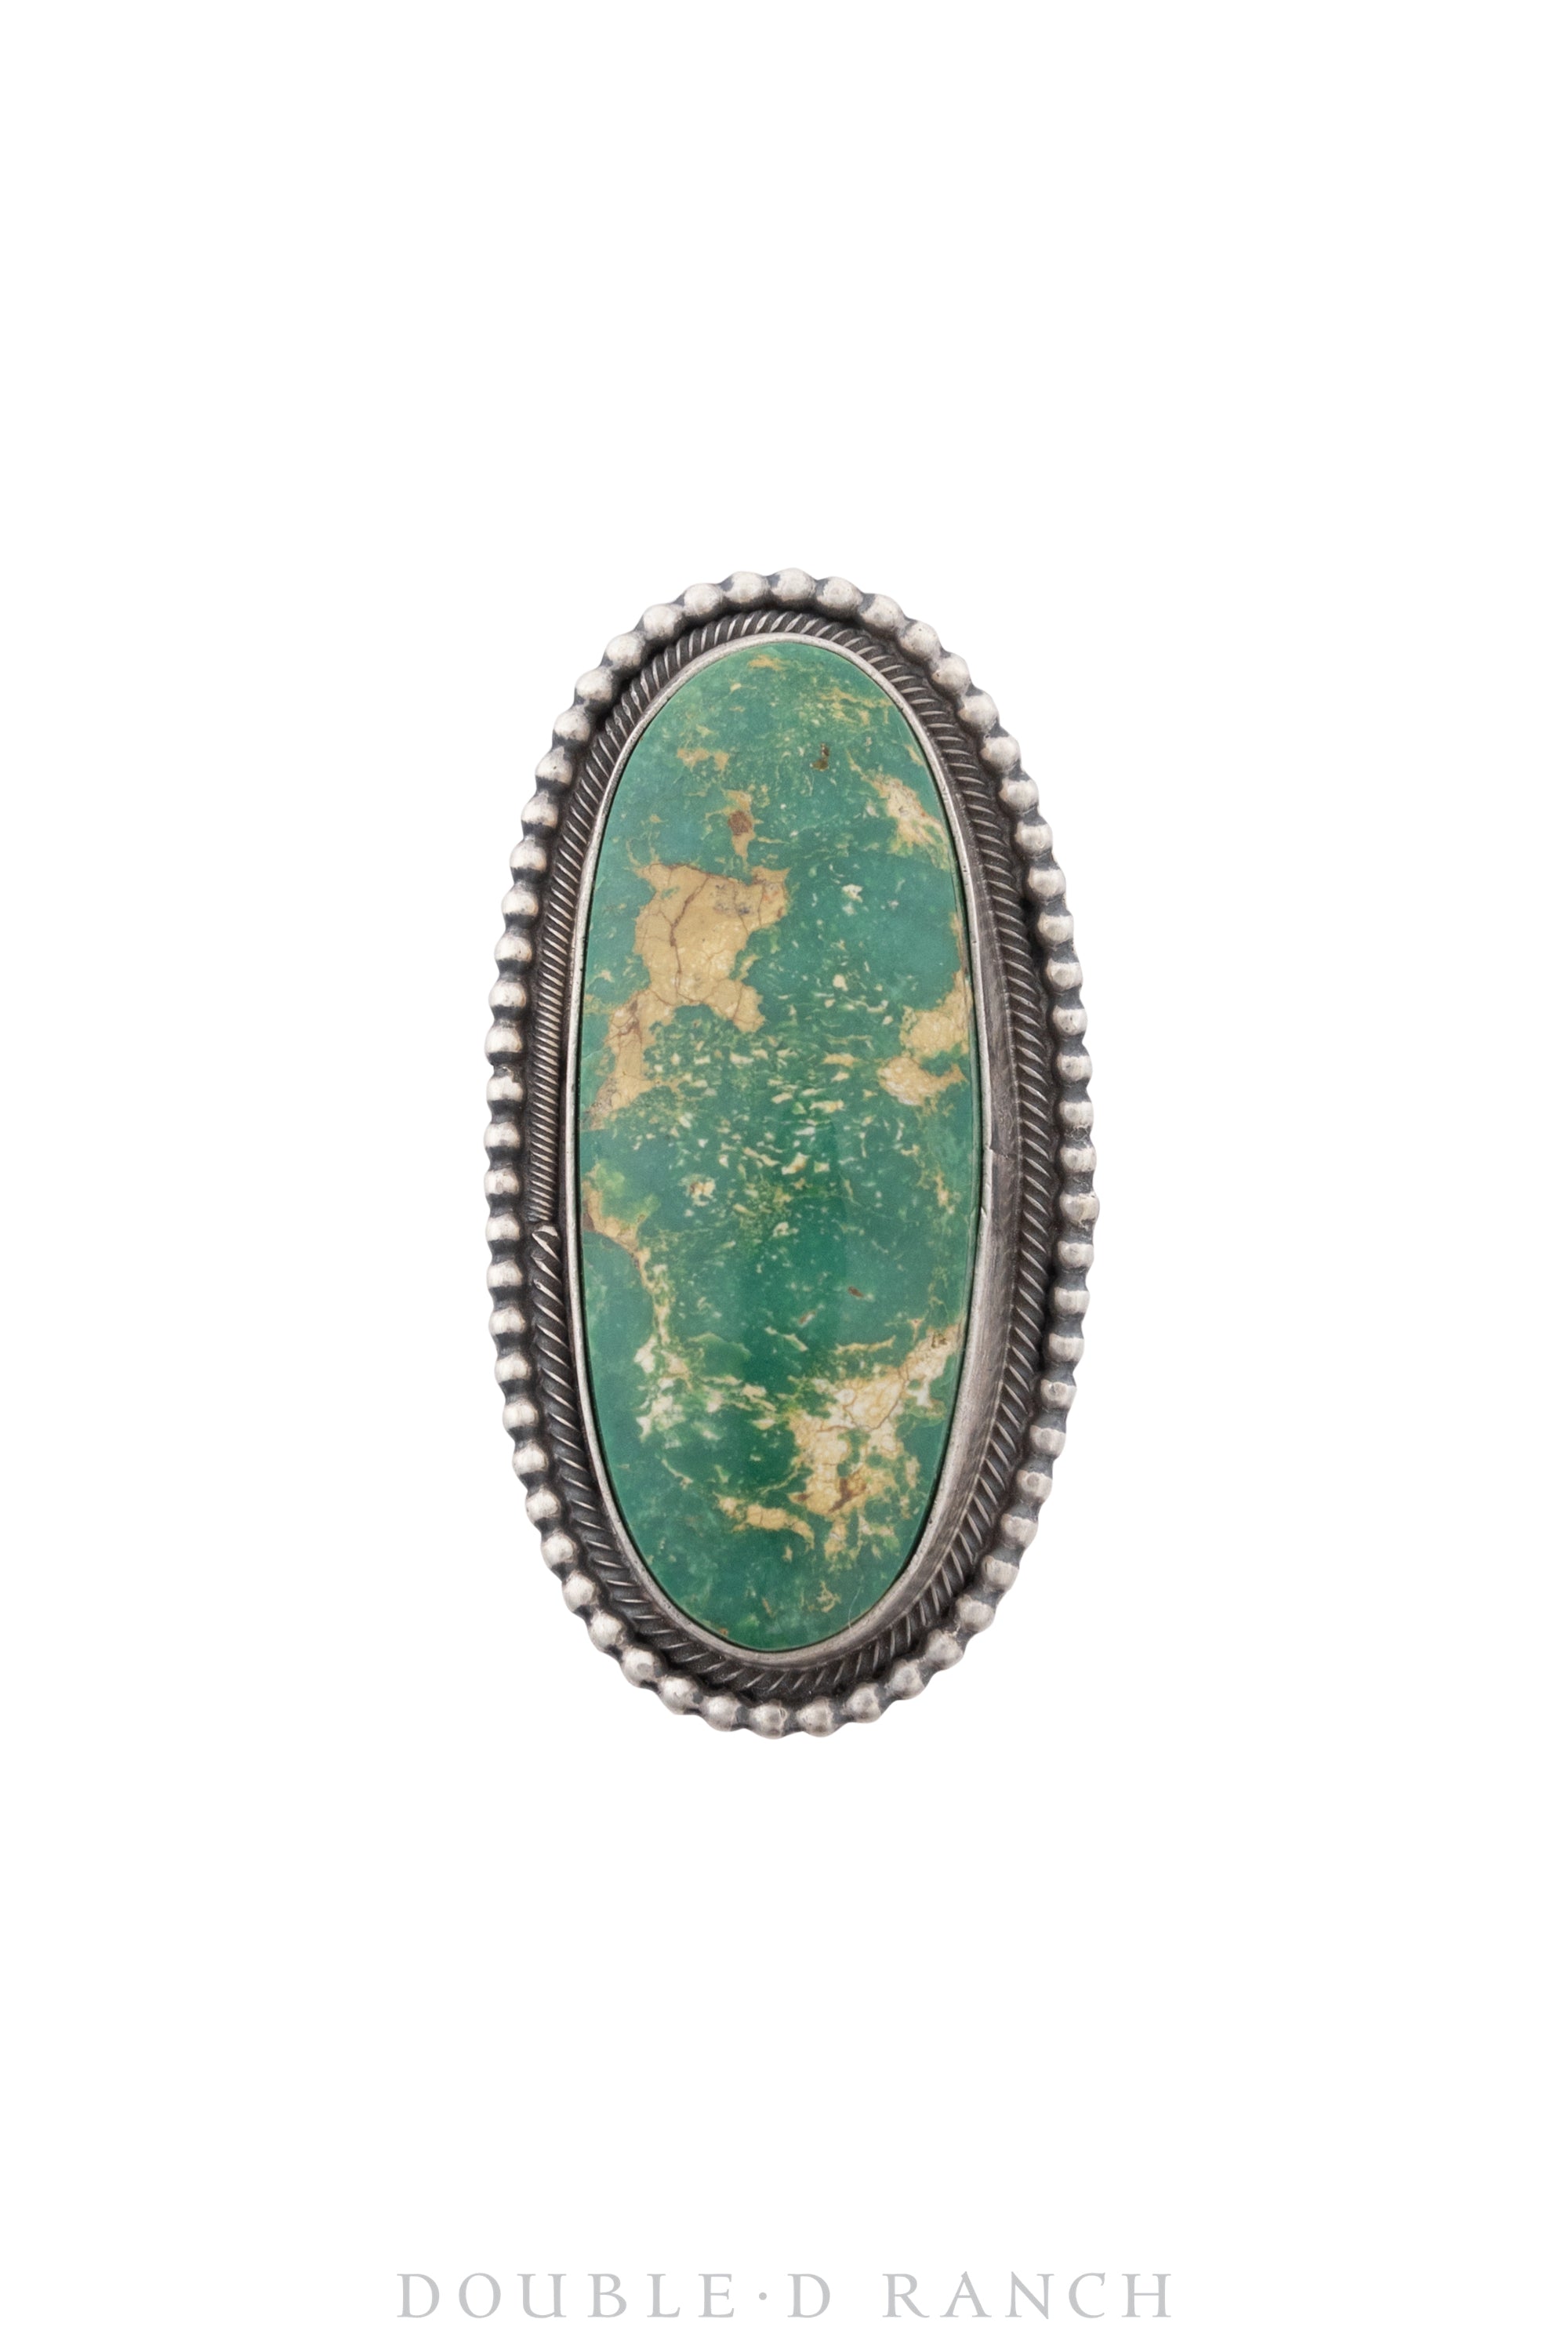 Ring, Natural Stone, Turquoise, Hallmark, Contemporary, 1298